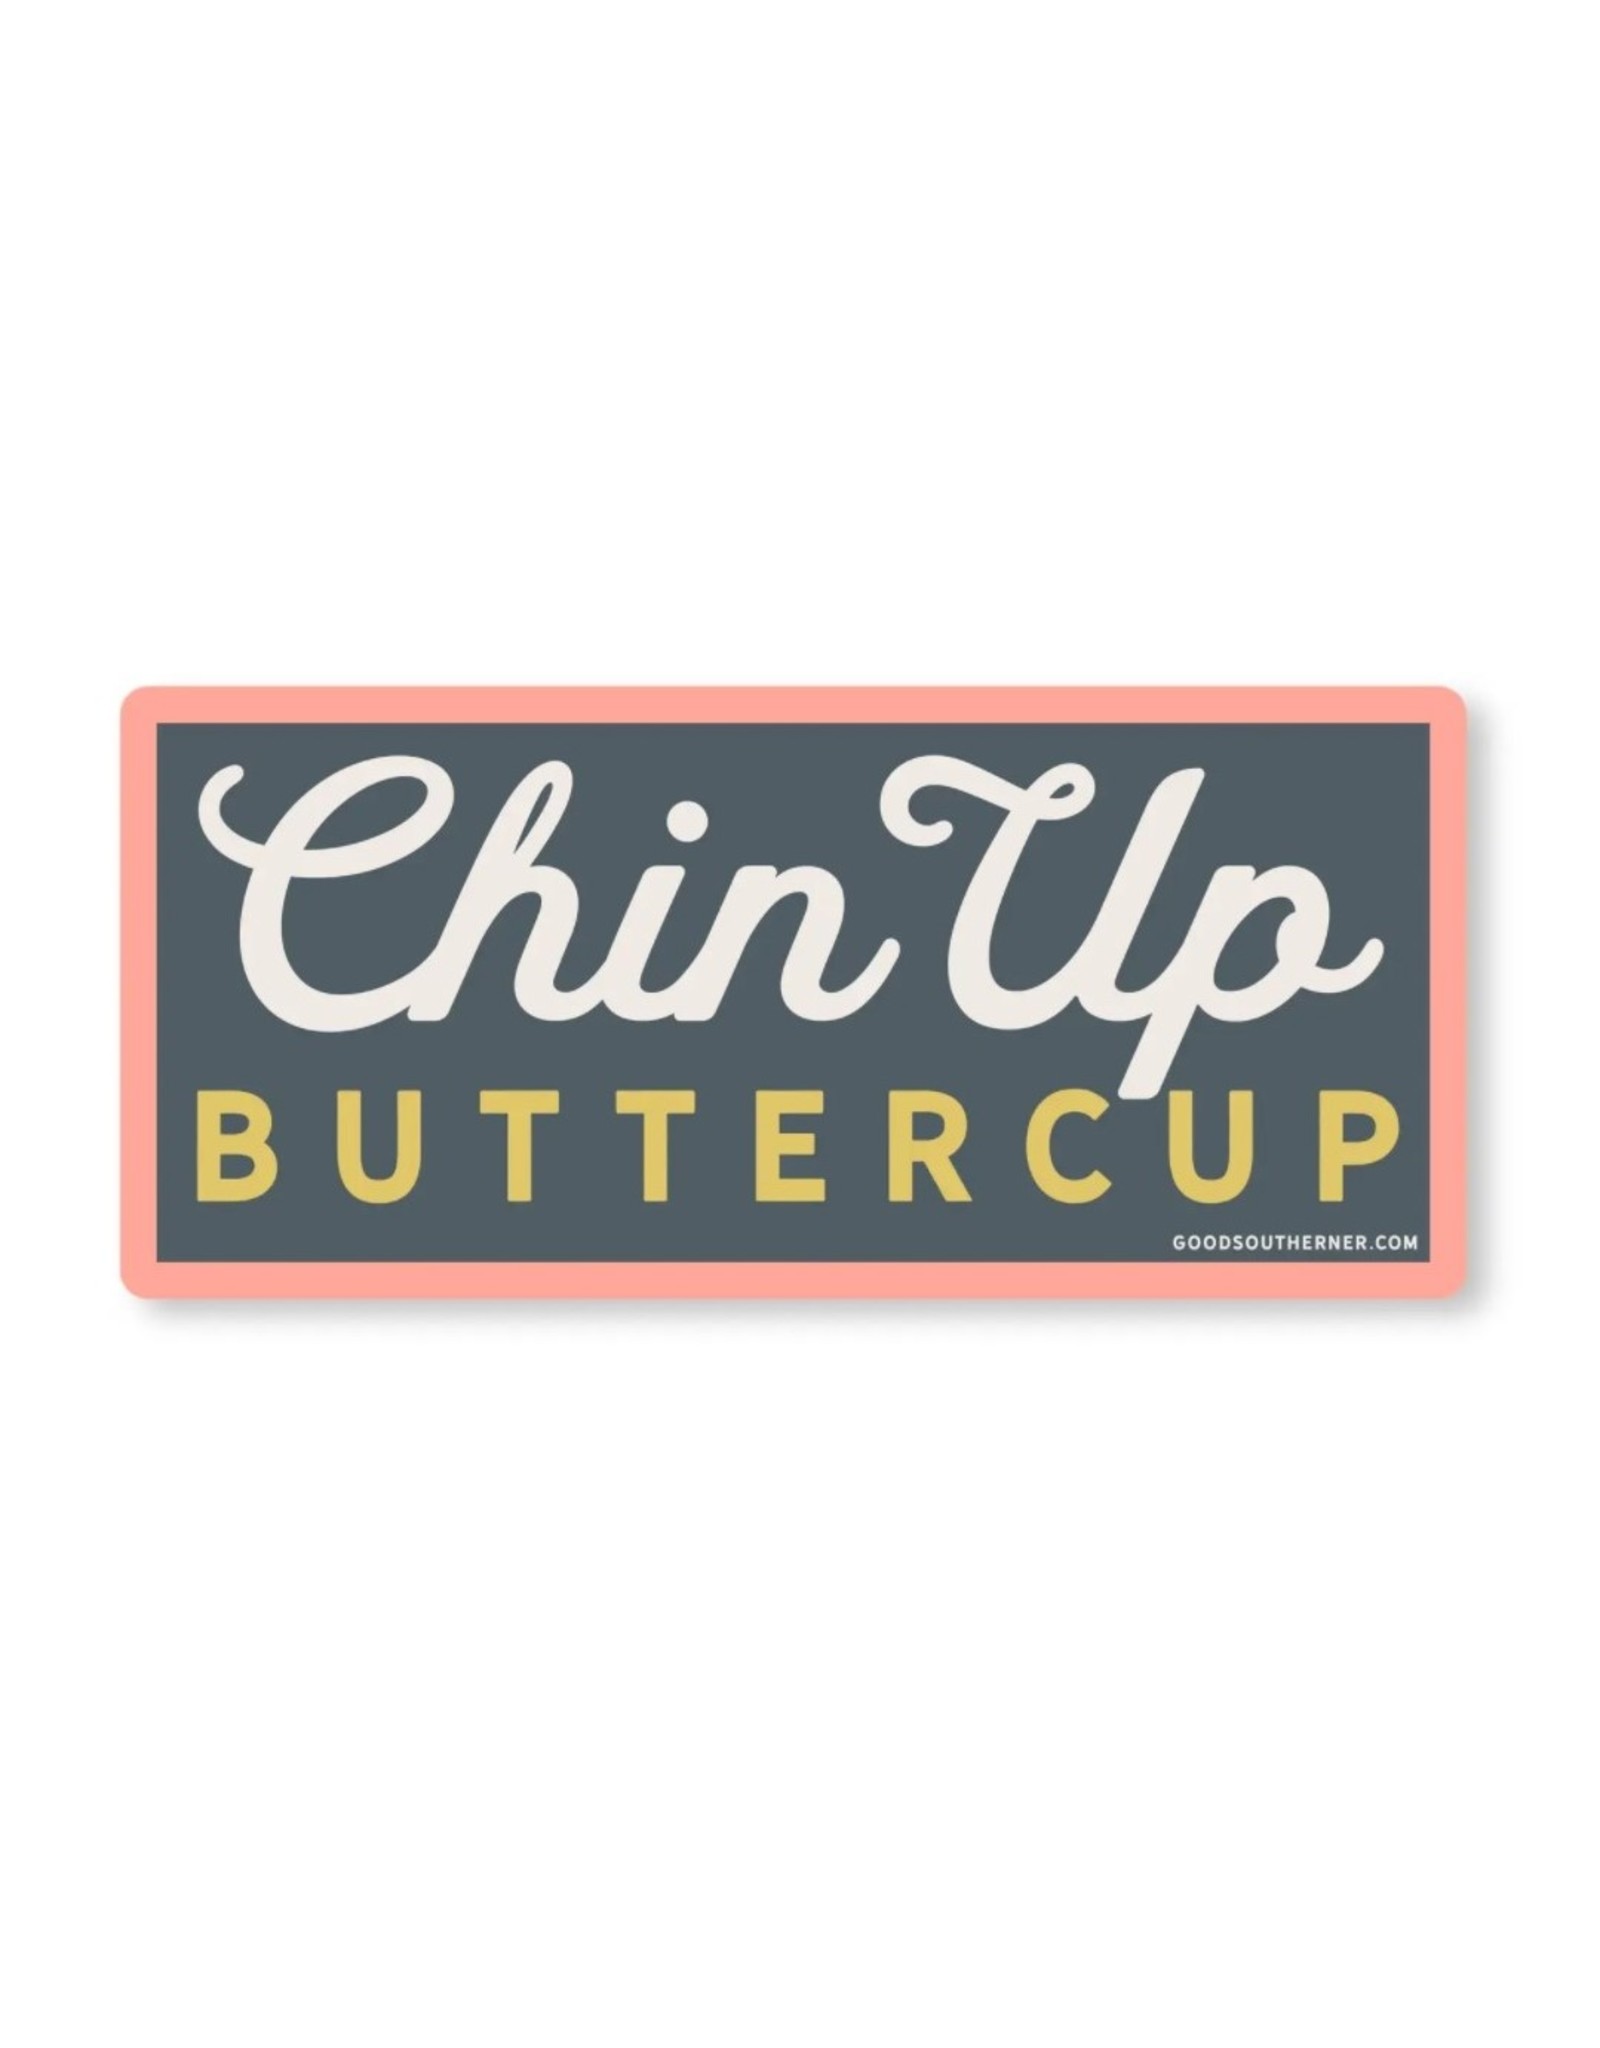 Good southerner Chin Up Buttercup